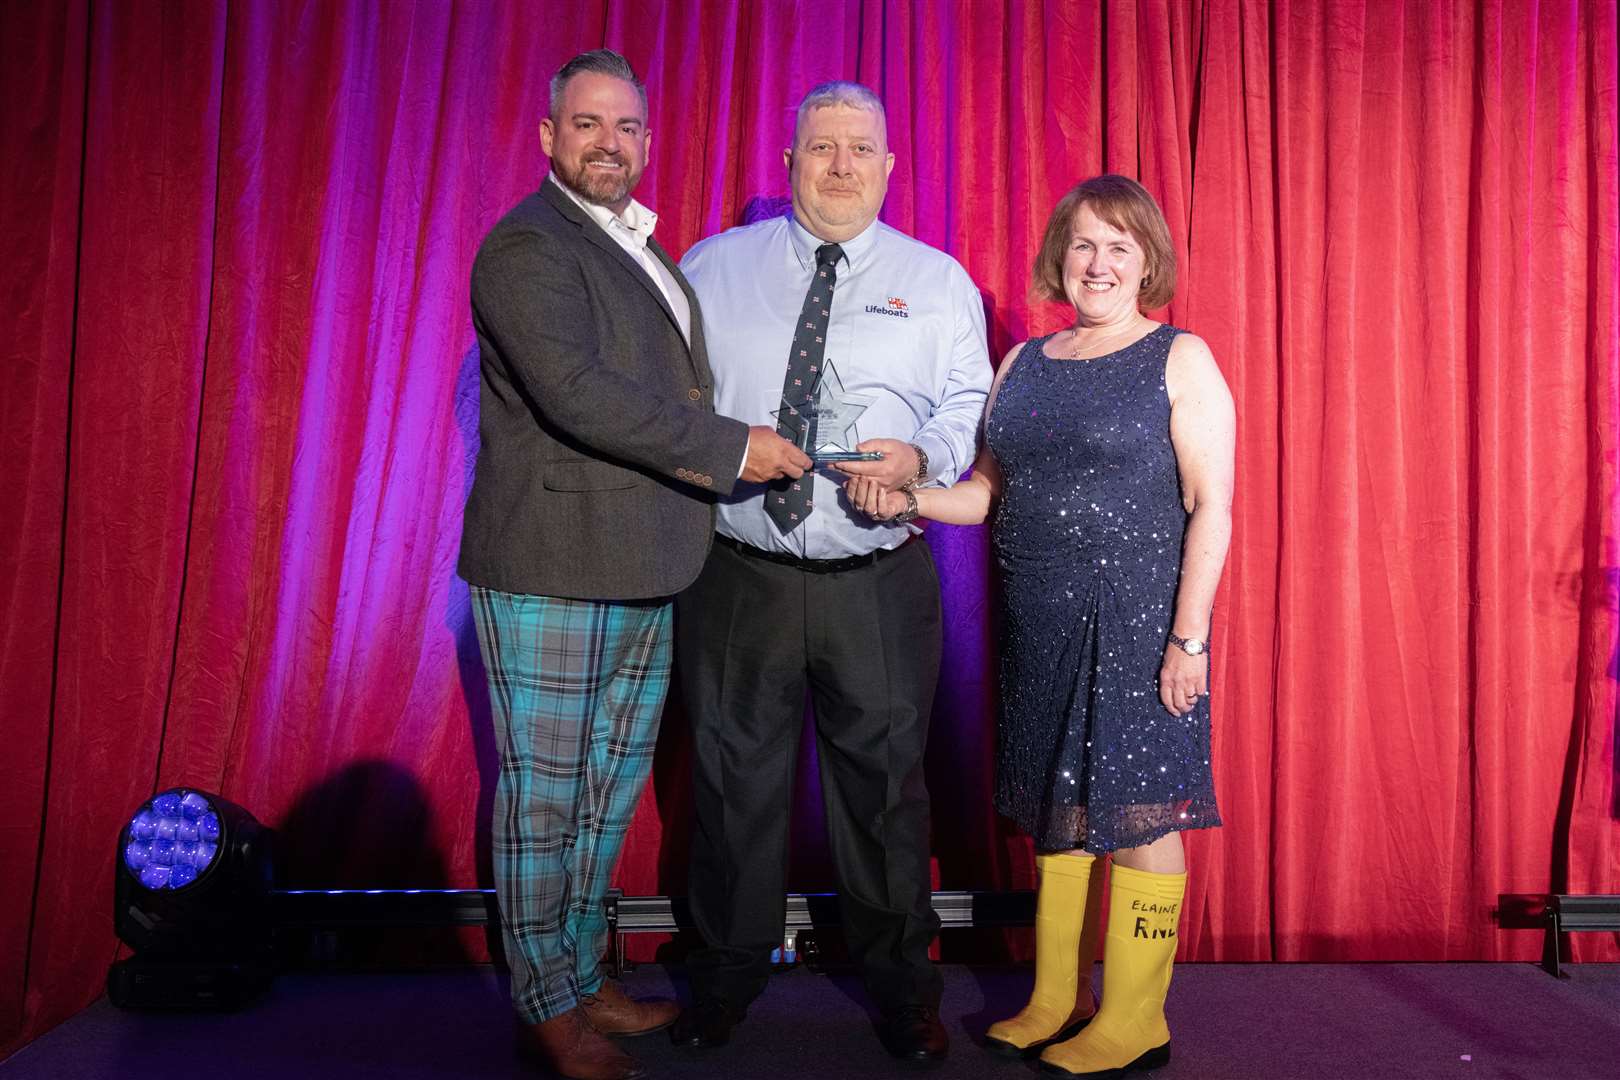 Buckie RNLI coxswain Davie Grant (centre) and LOM Anne Scott – complete with a pair of yellow wellies – accept the Emergency Services trophy from Dave Acton, CEO of Motive Offshore. Picture: Beth Taylor.